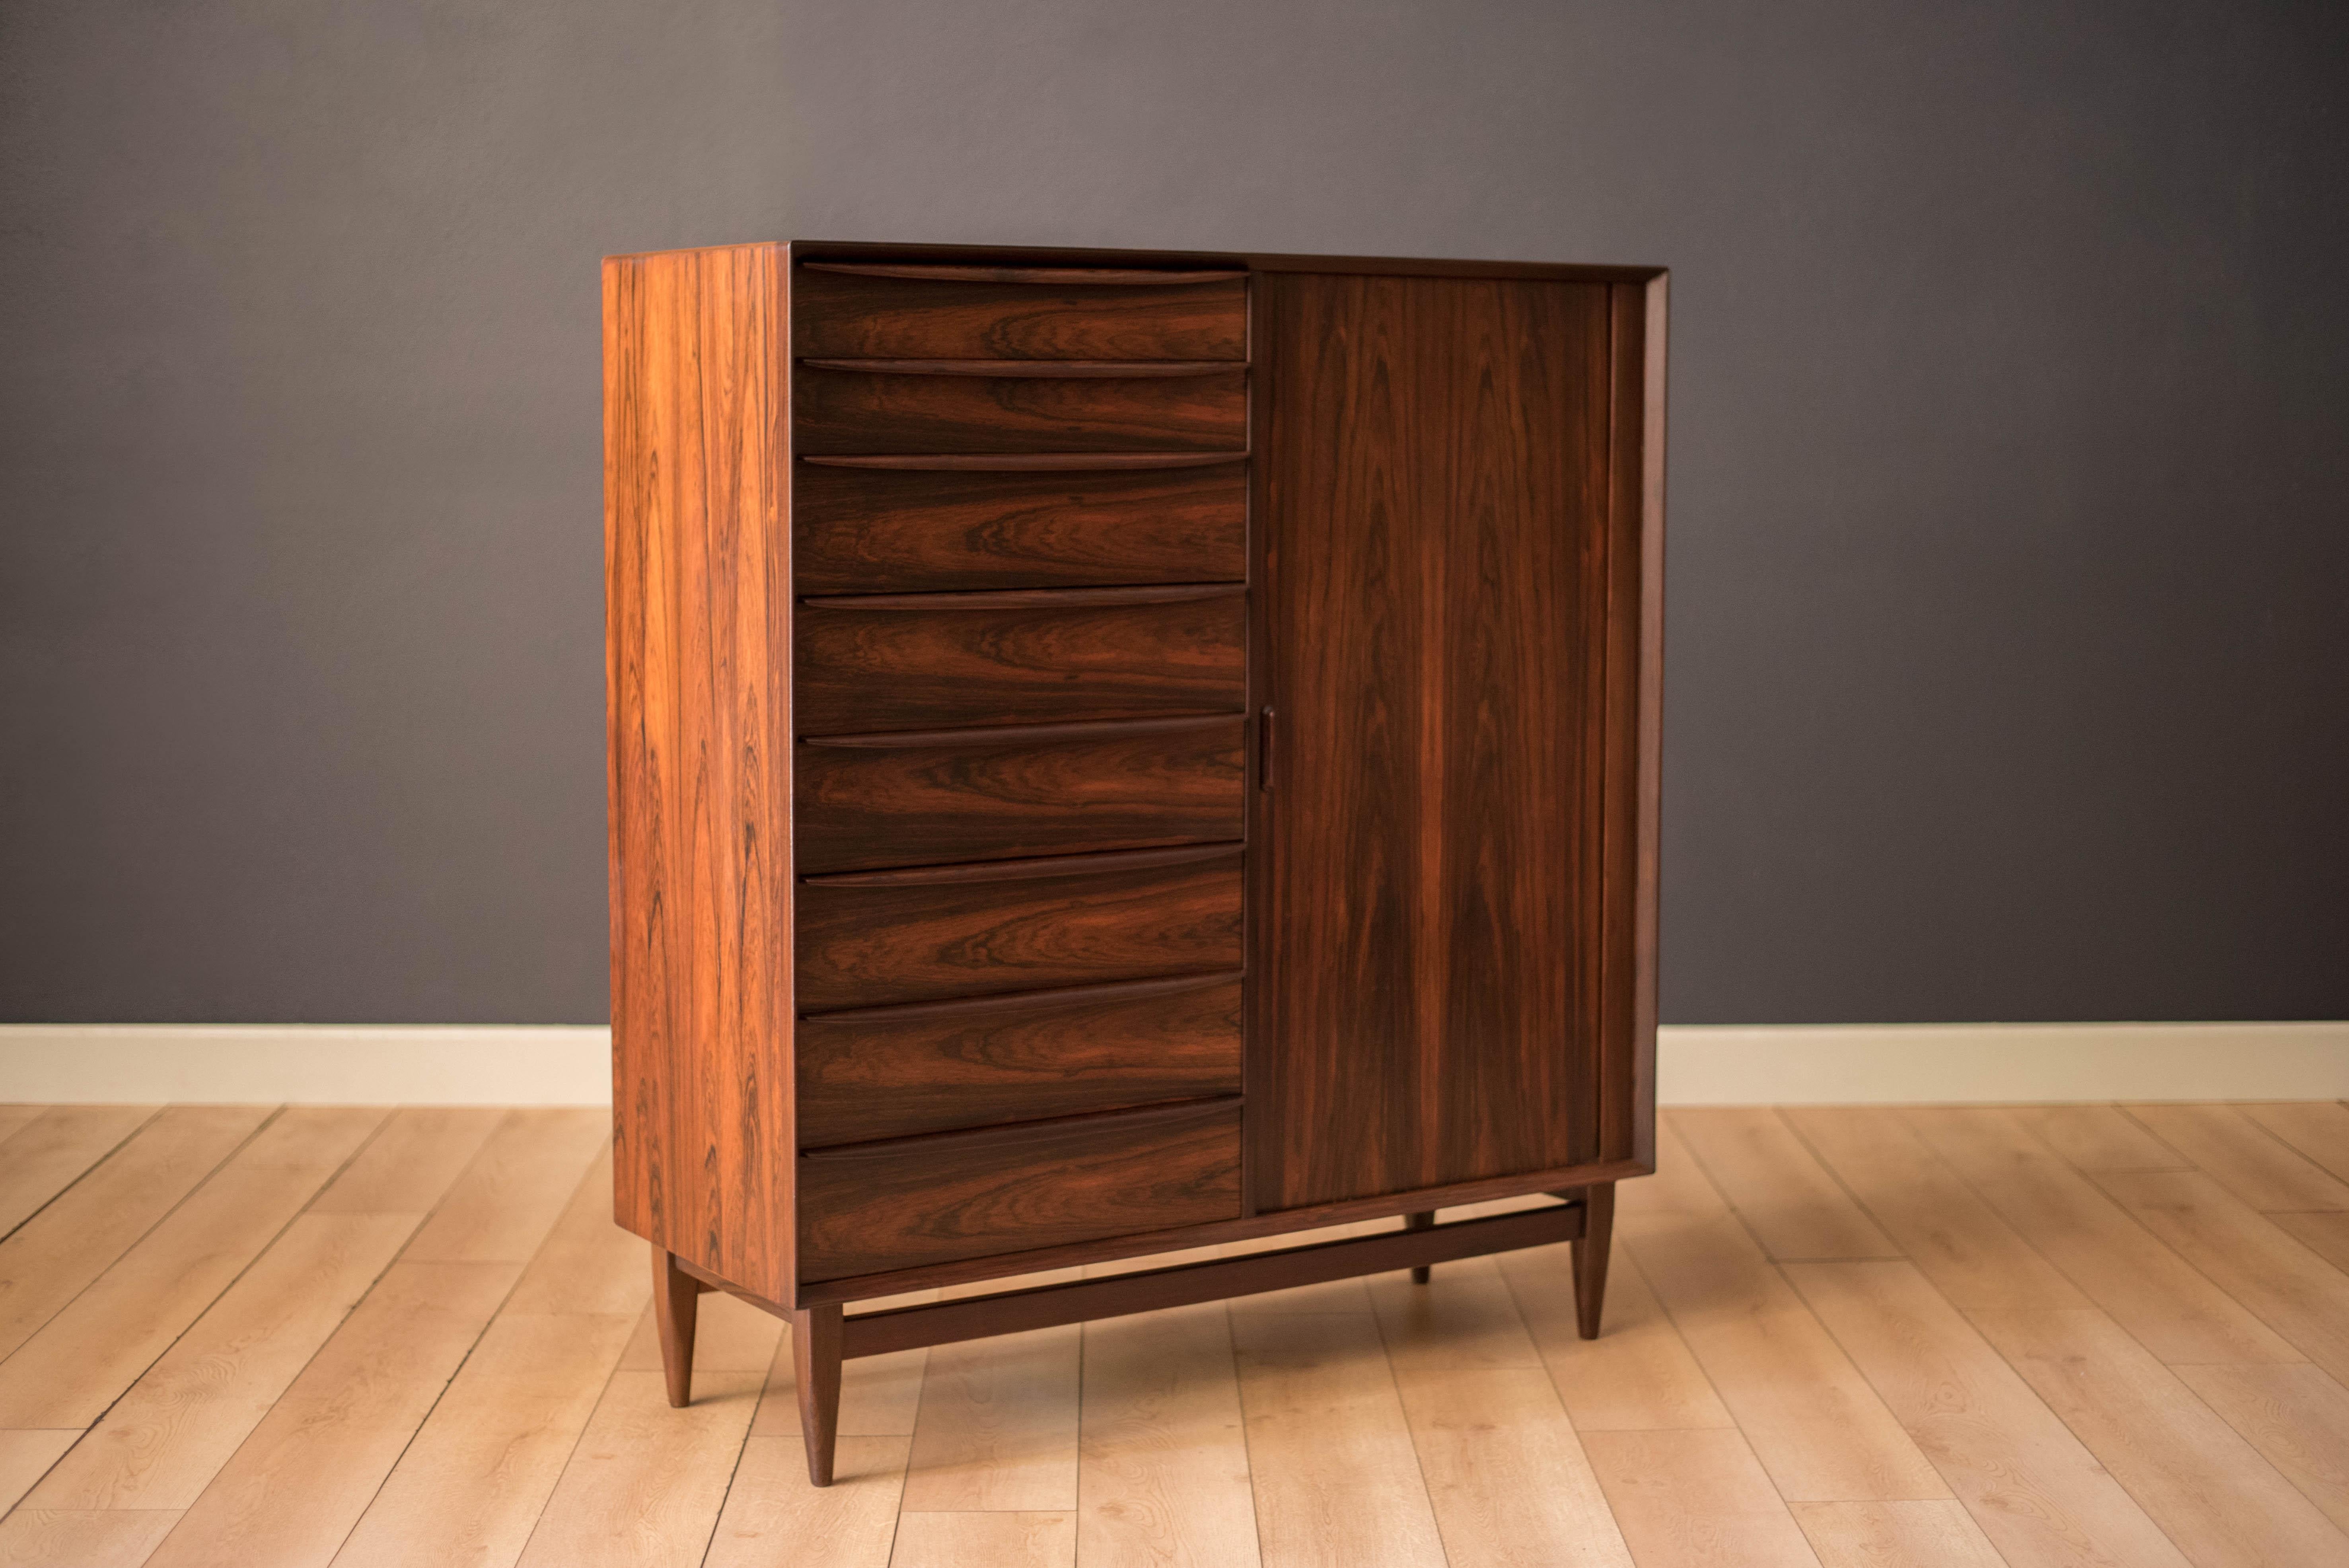 Mid-Century Modern highboy dresser chest in rosewood designed by Svend A. Madsen for Falster Møbelfabrik, Denmark. Features eight dovetailed storage drawers with sculpted pulls and a sliding tambour door that reveals an additional nine